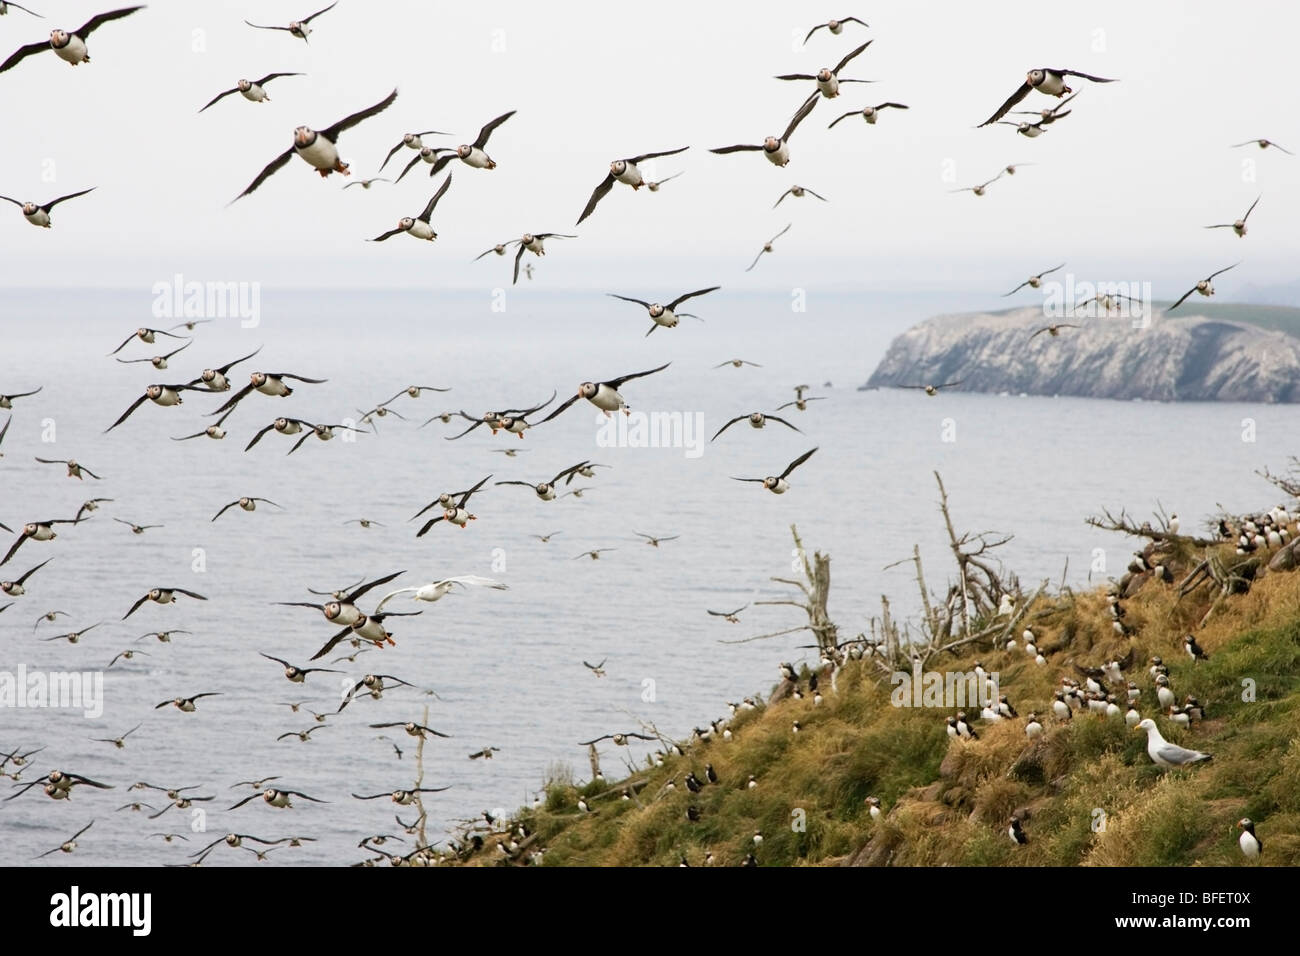 Atlantic puffins (Fratercula arctica) flying by nesting colony Gull Island, Witless Bay Ecological Reserve, Newfoundland, Canada Stock Photo